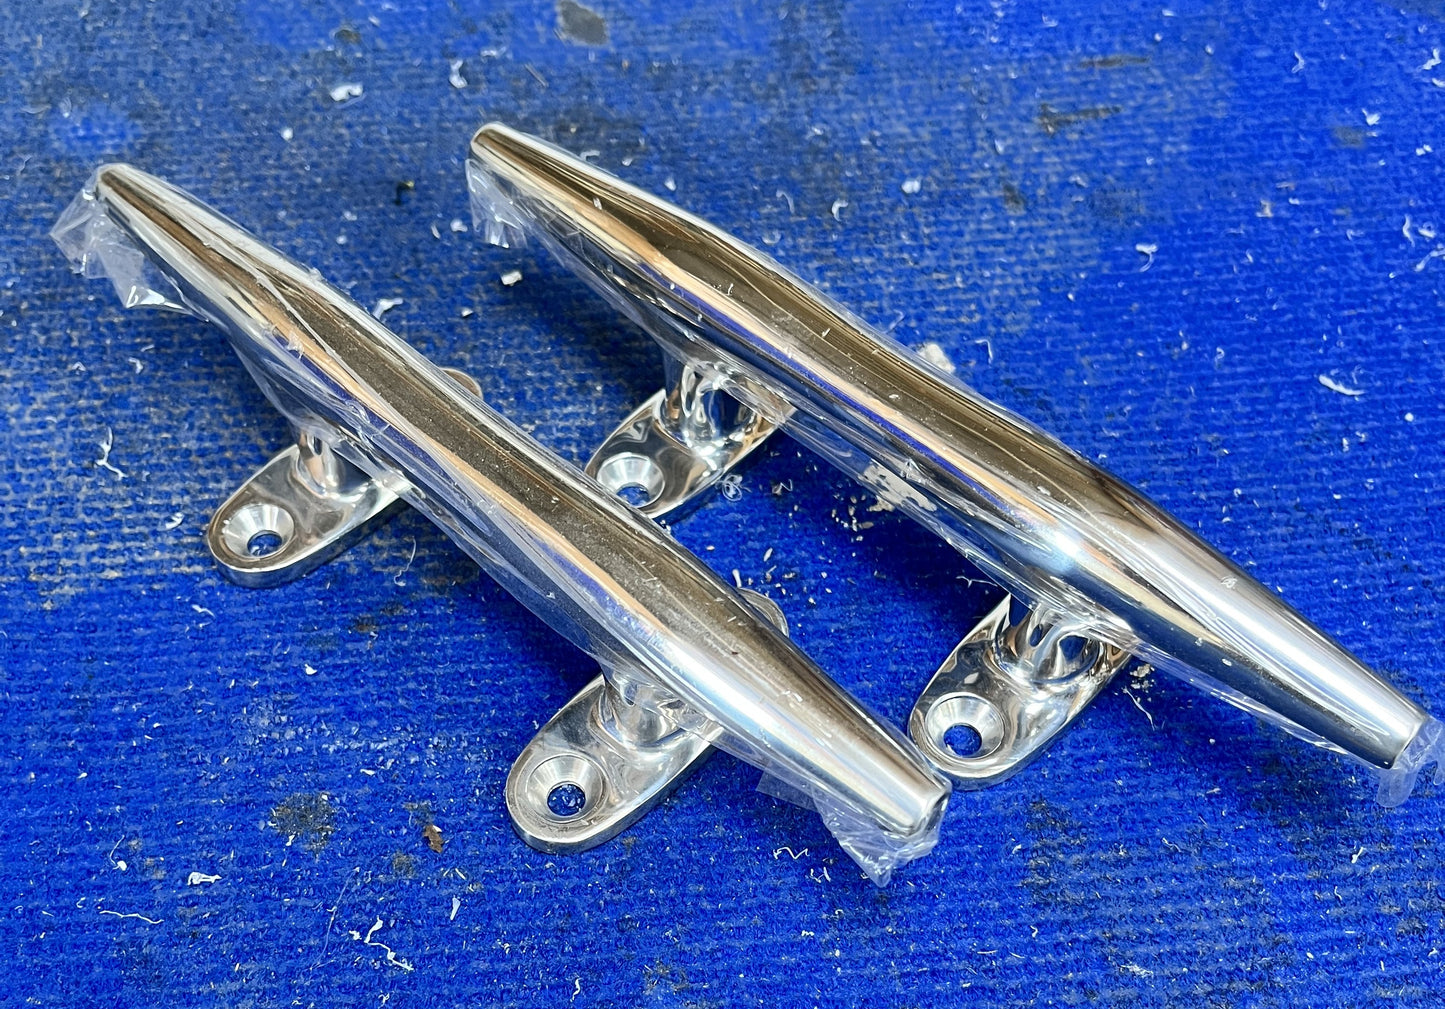 Stainless steel cleat